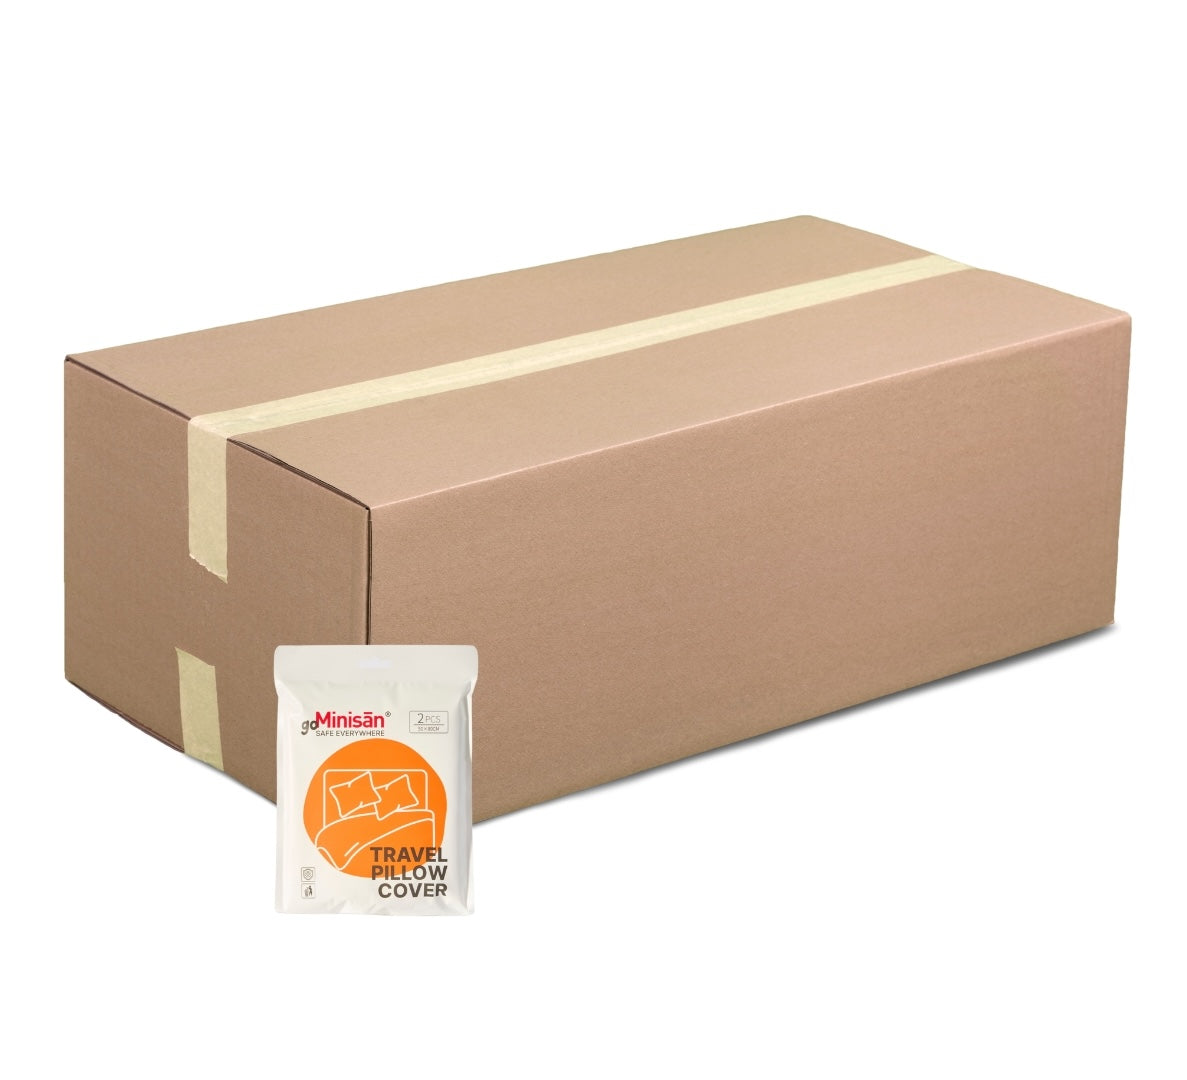 BOX - 200 PACKAGES TRAVEL PILLOW COVER